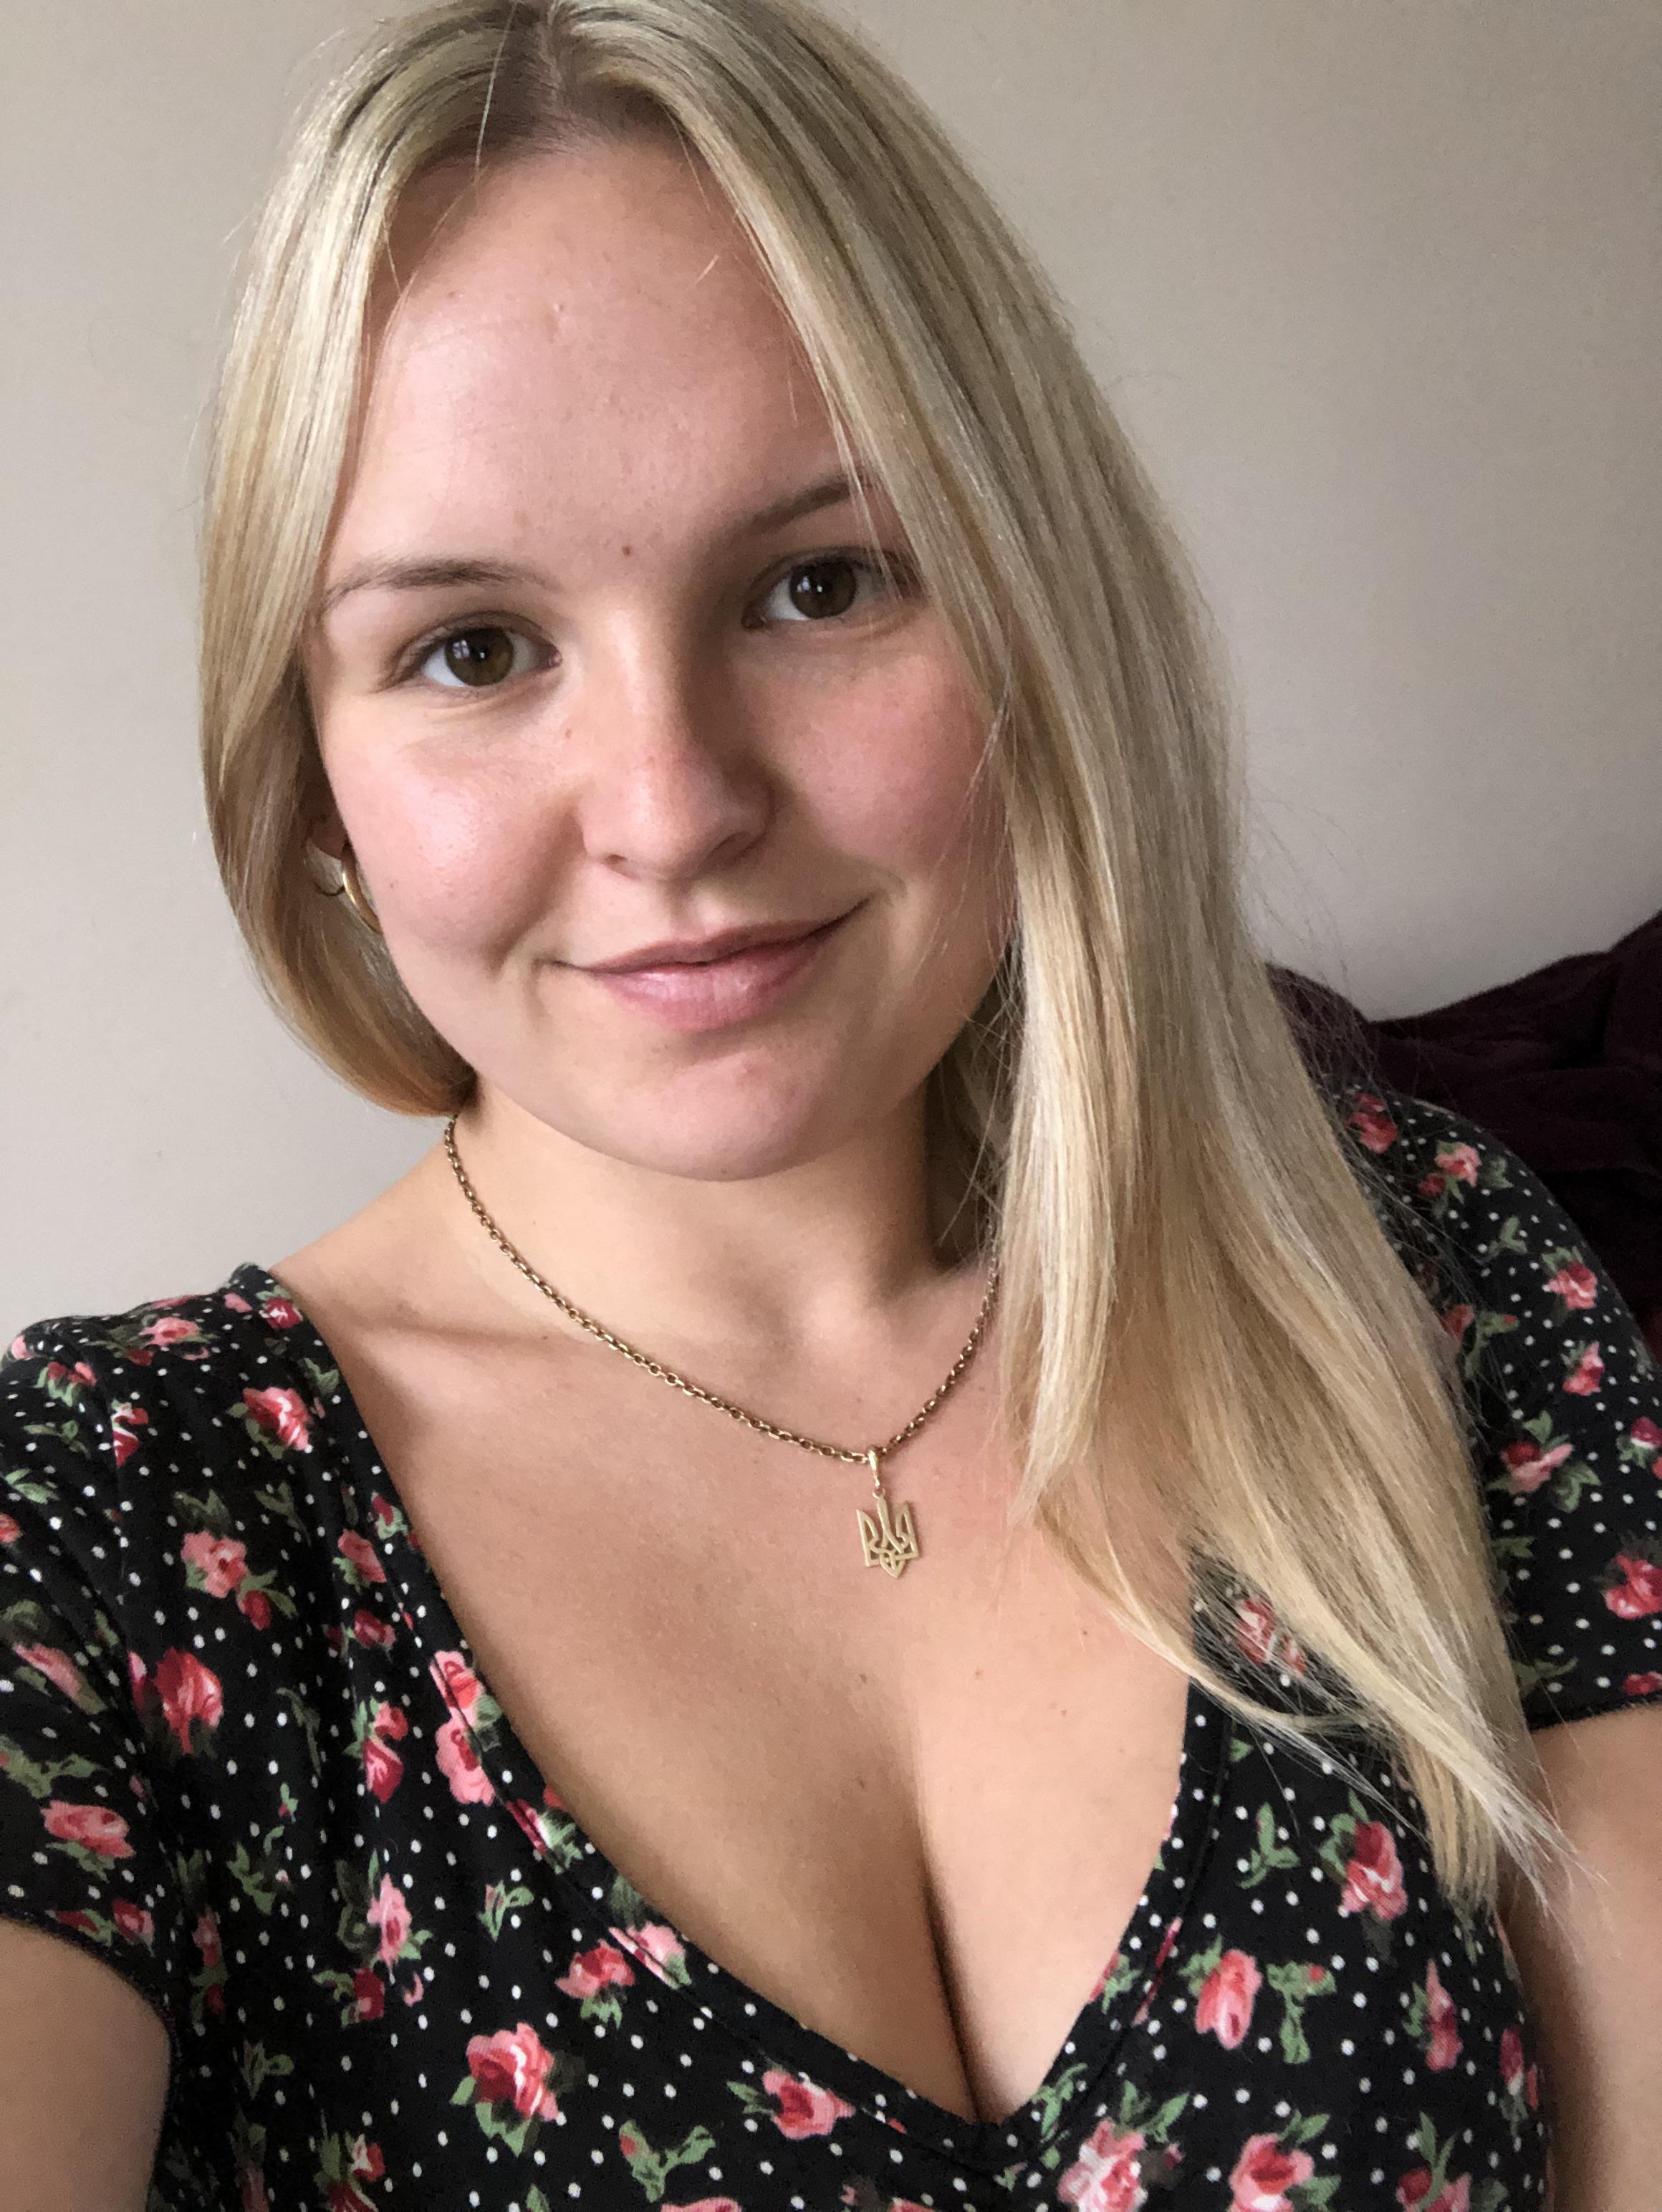 Feeling pretty in this top :)